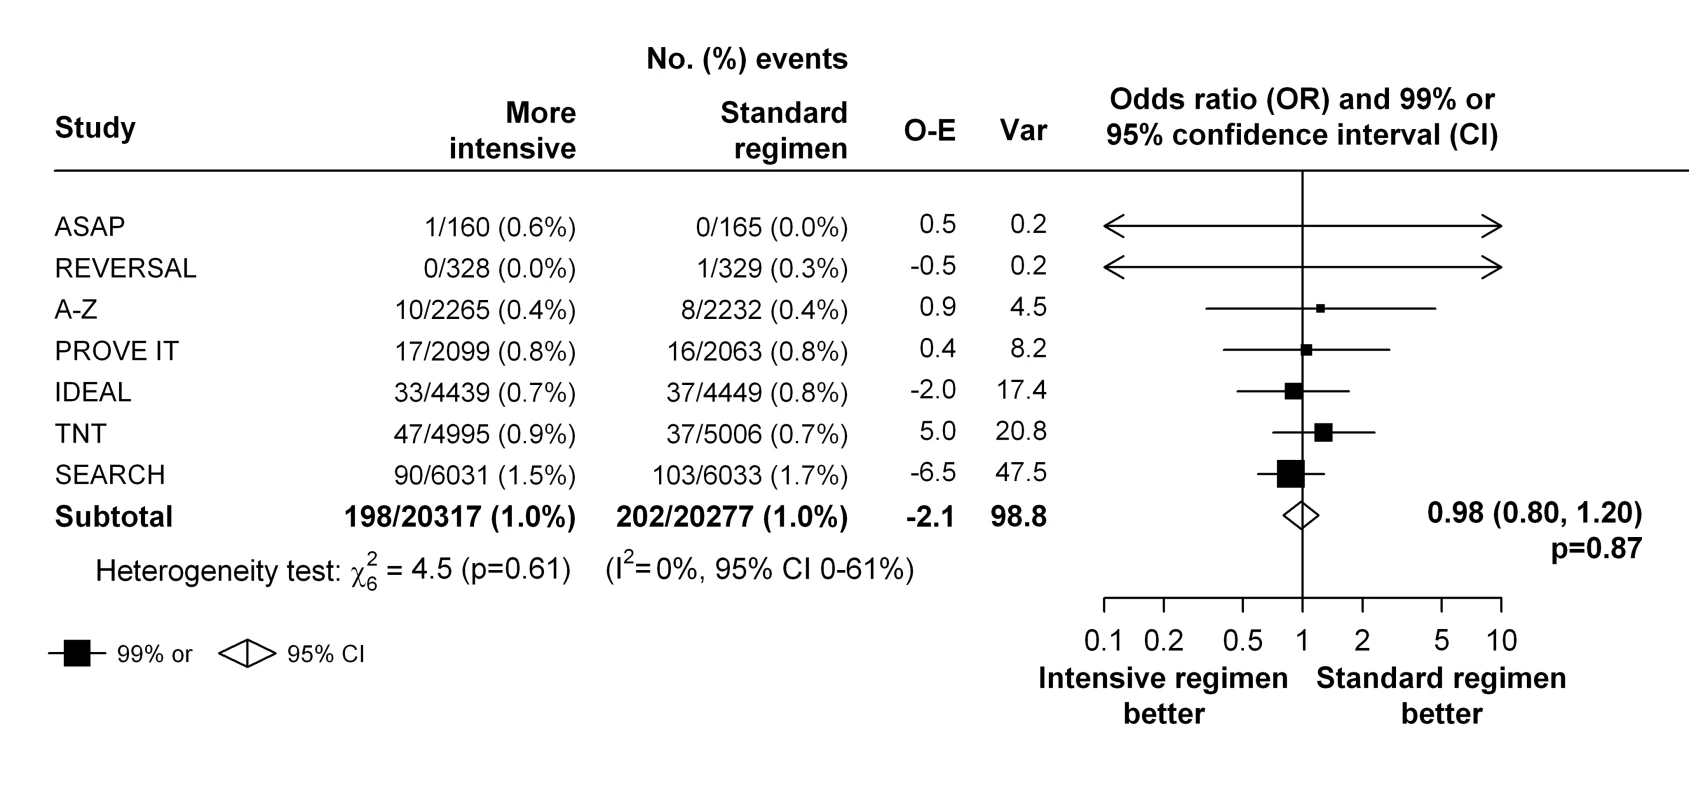 Effect of more intensive versus standard statin therapy on venous thromboembolism.